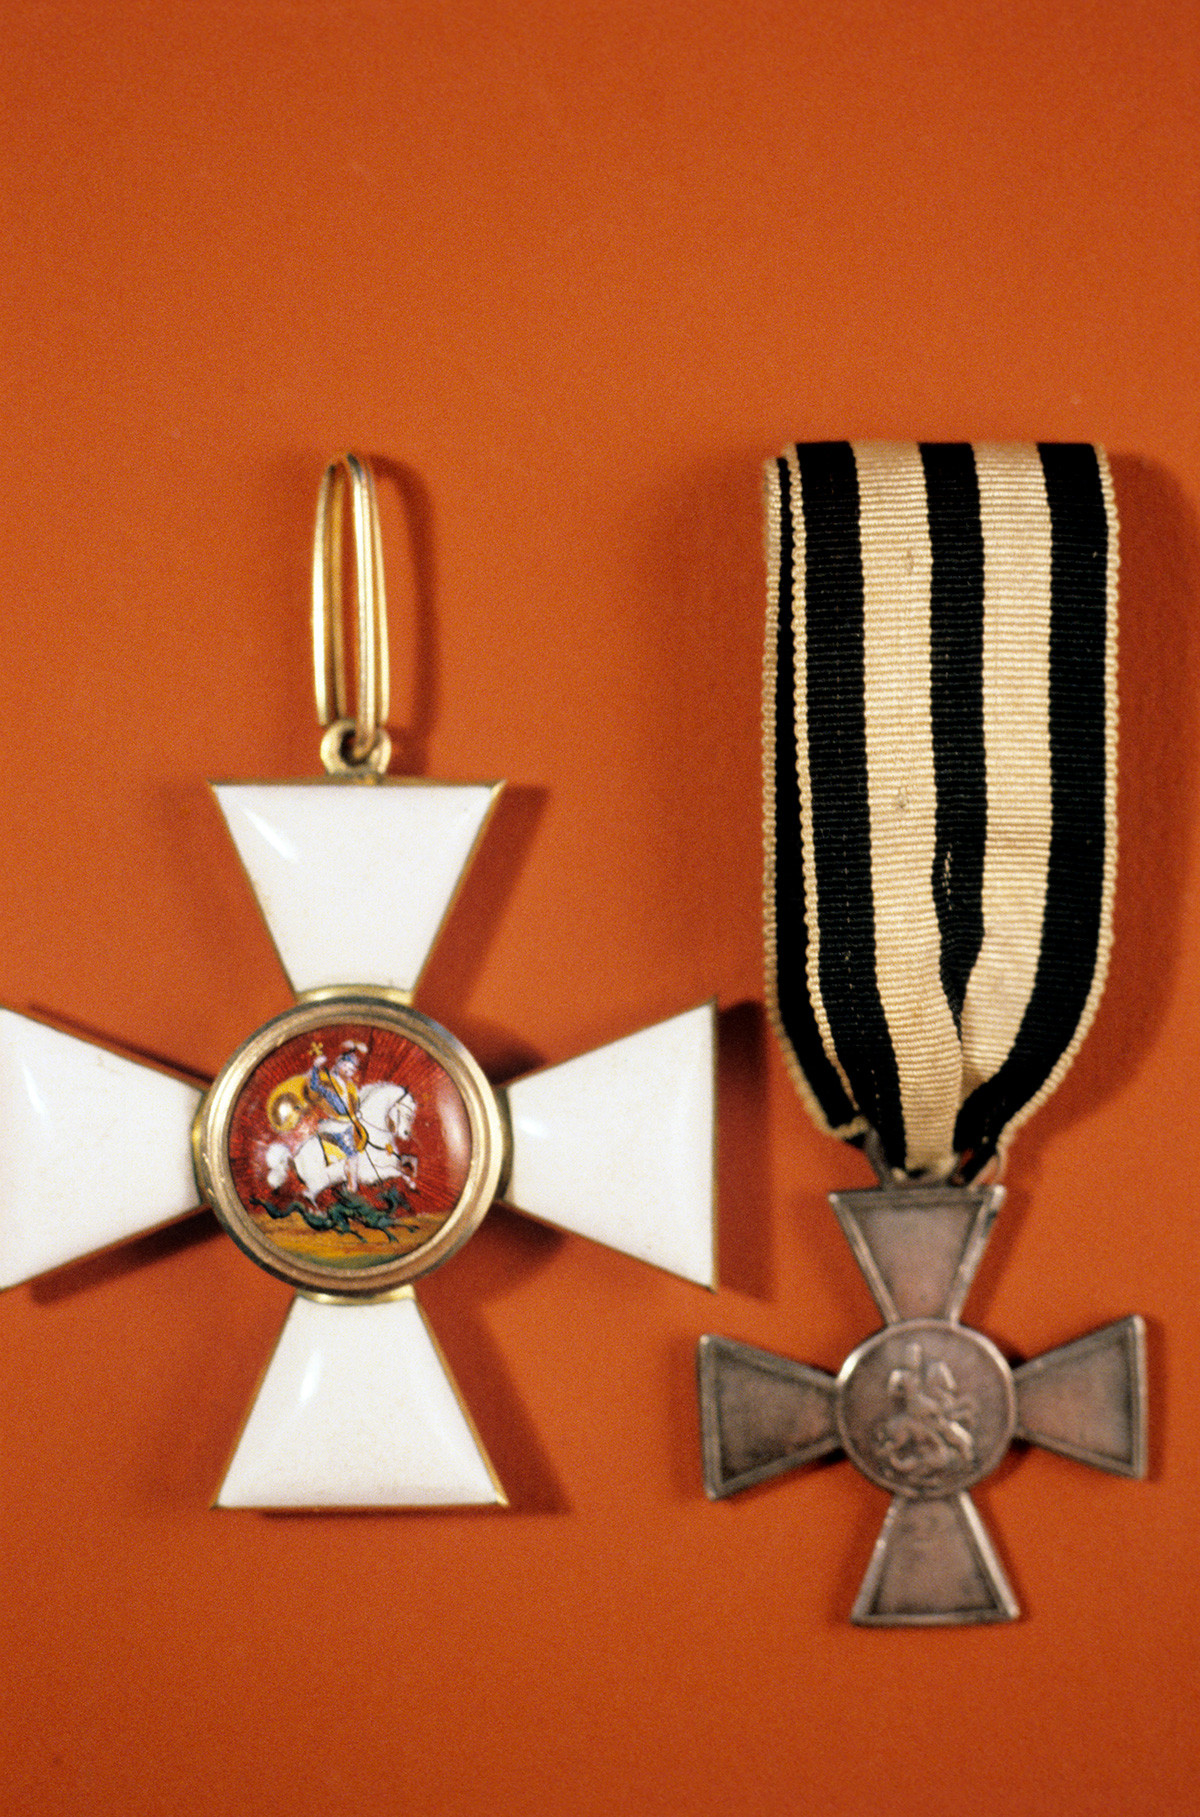 The Cross (badge) (L) of the Order of St. George, and the iron Cross of St. George (R), decoration of the Order meant for soldiers